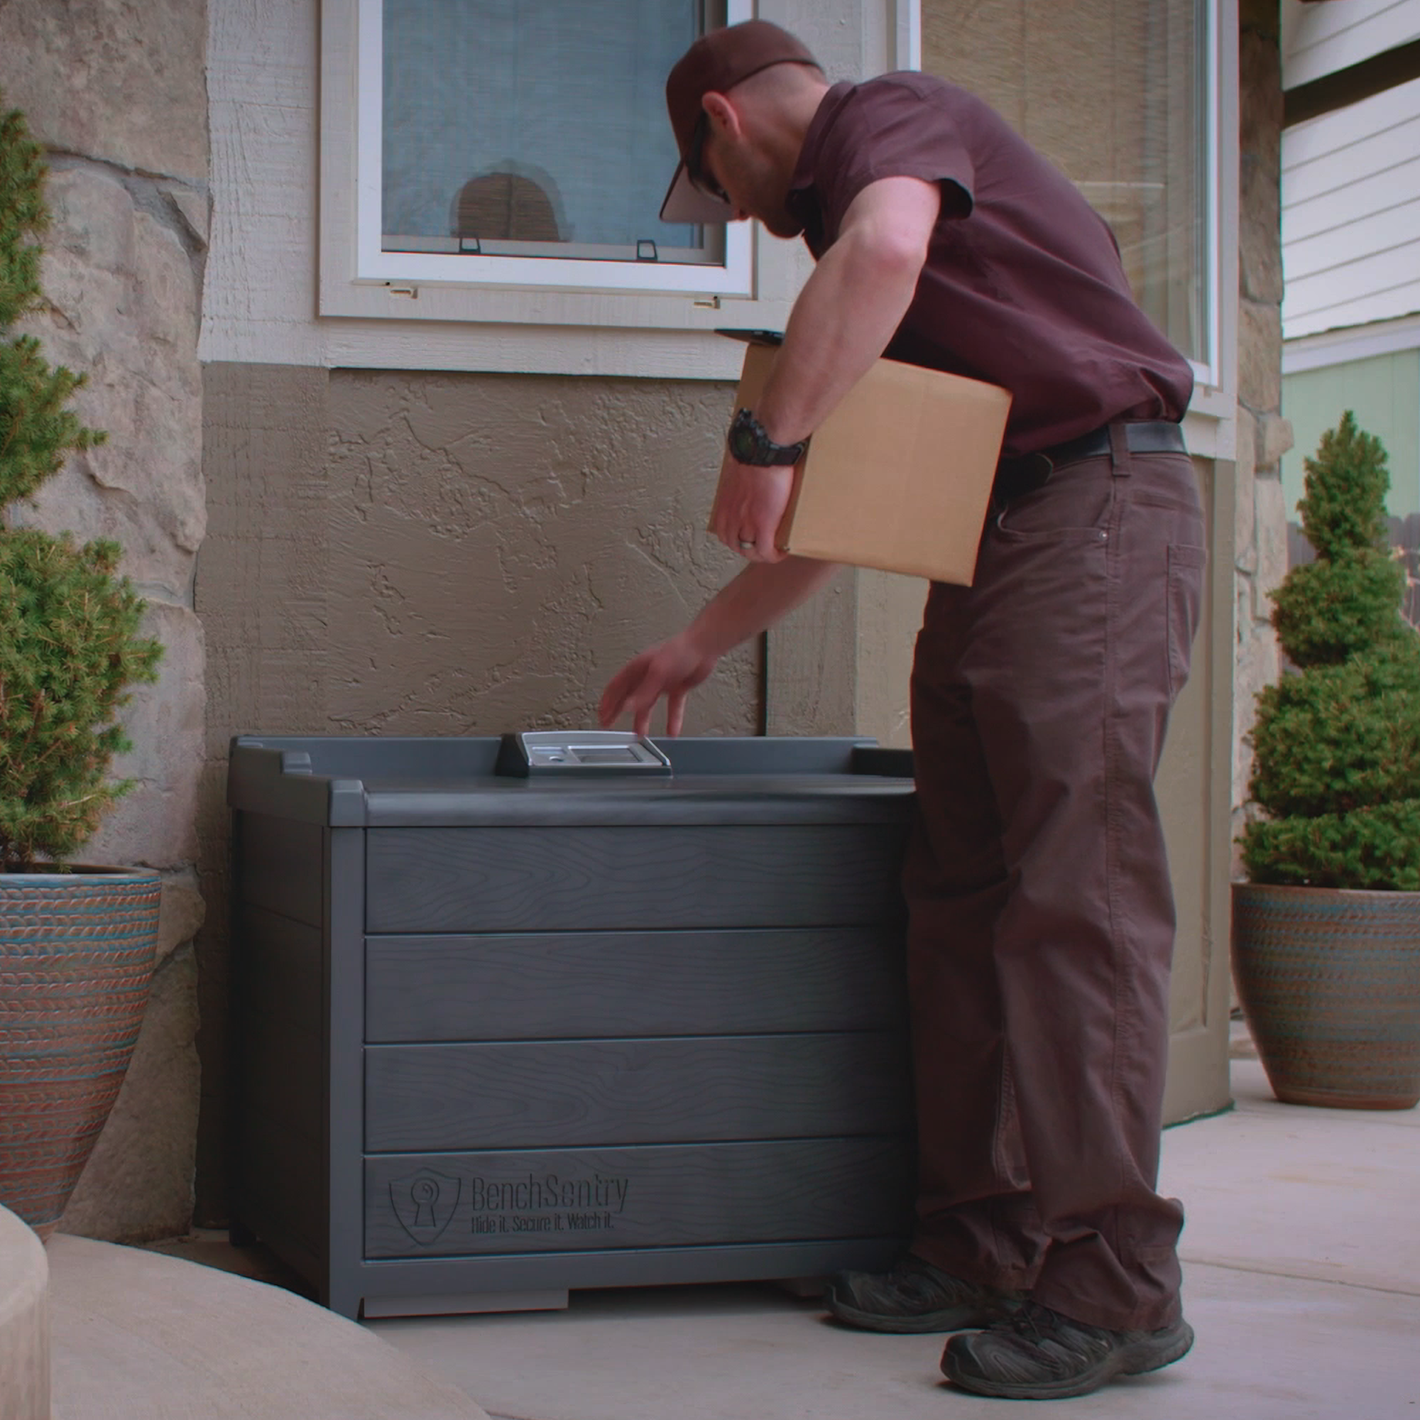 Delivery driver placing a package into a BenchSentry Connect Package Delivery Box